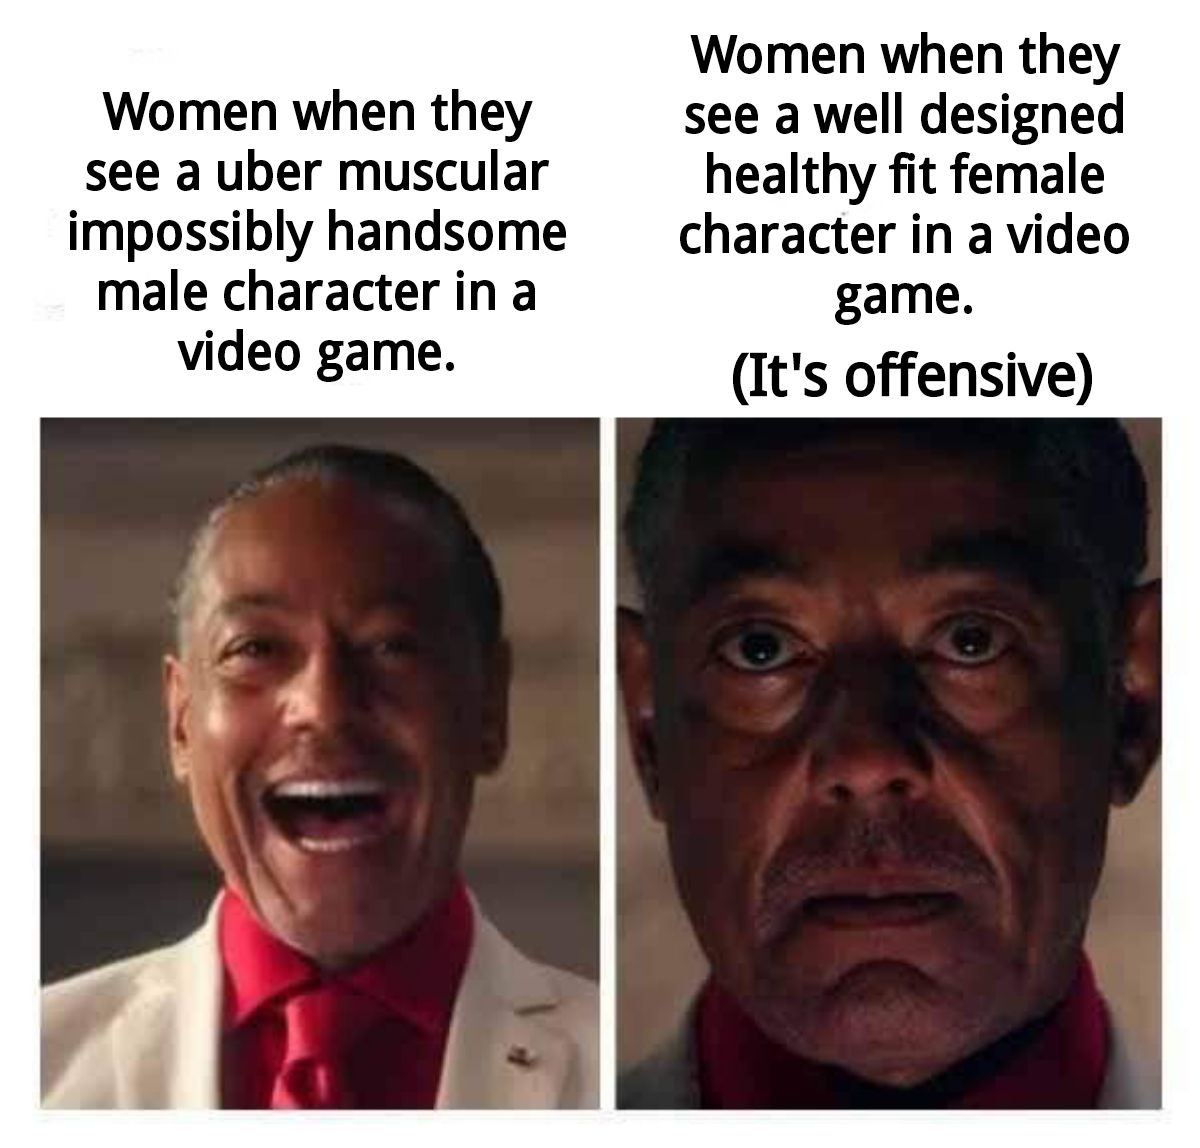 Double standards are stupid